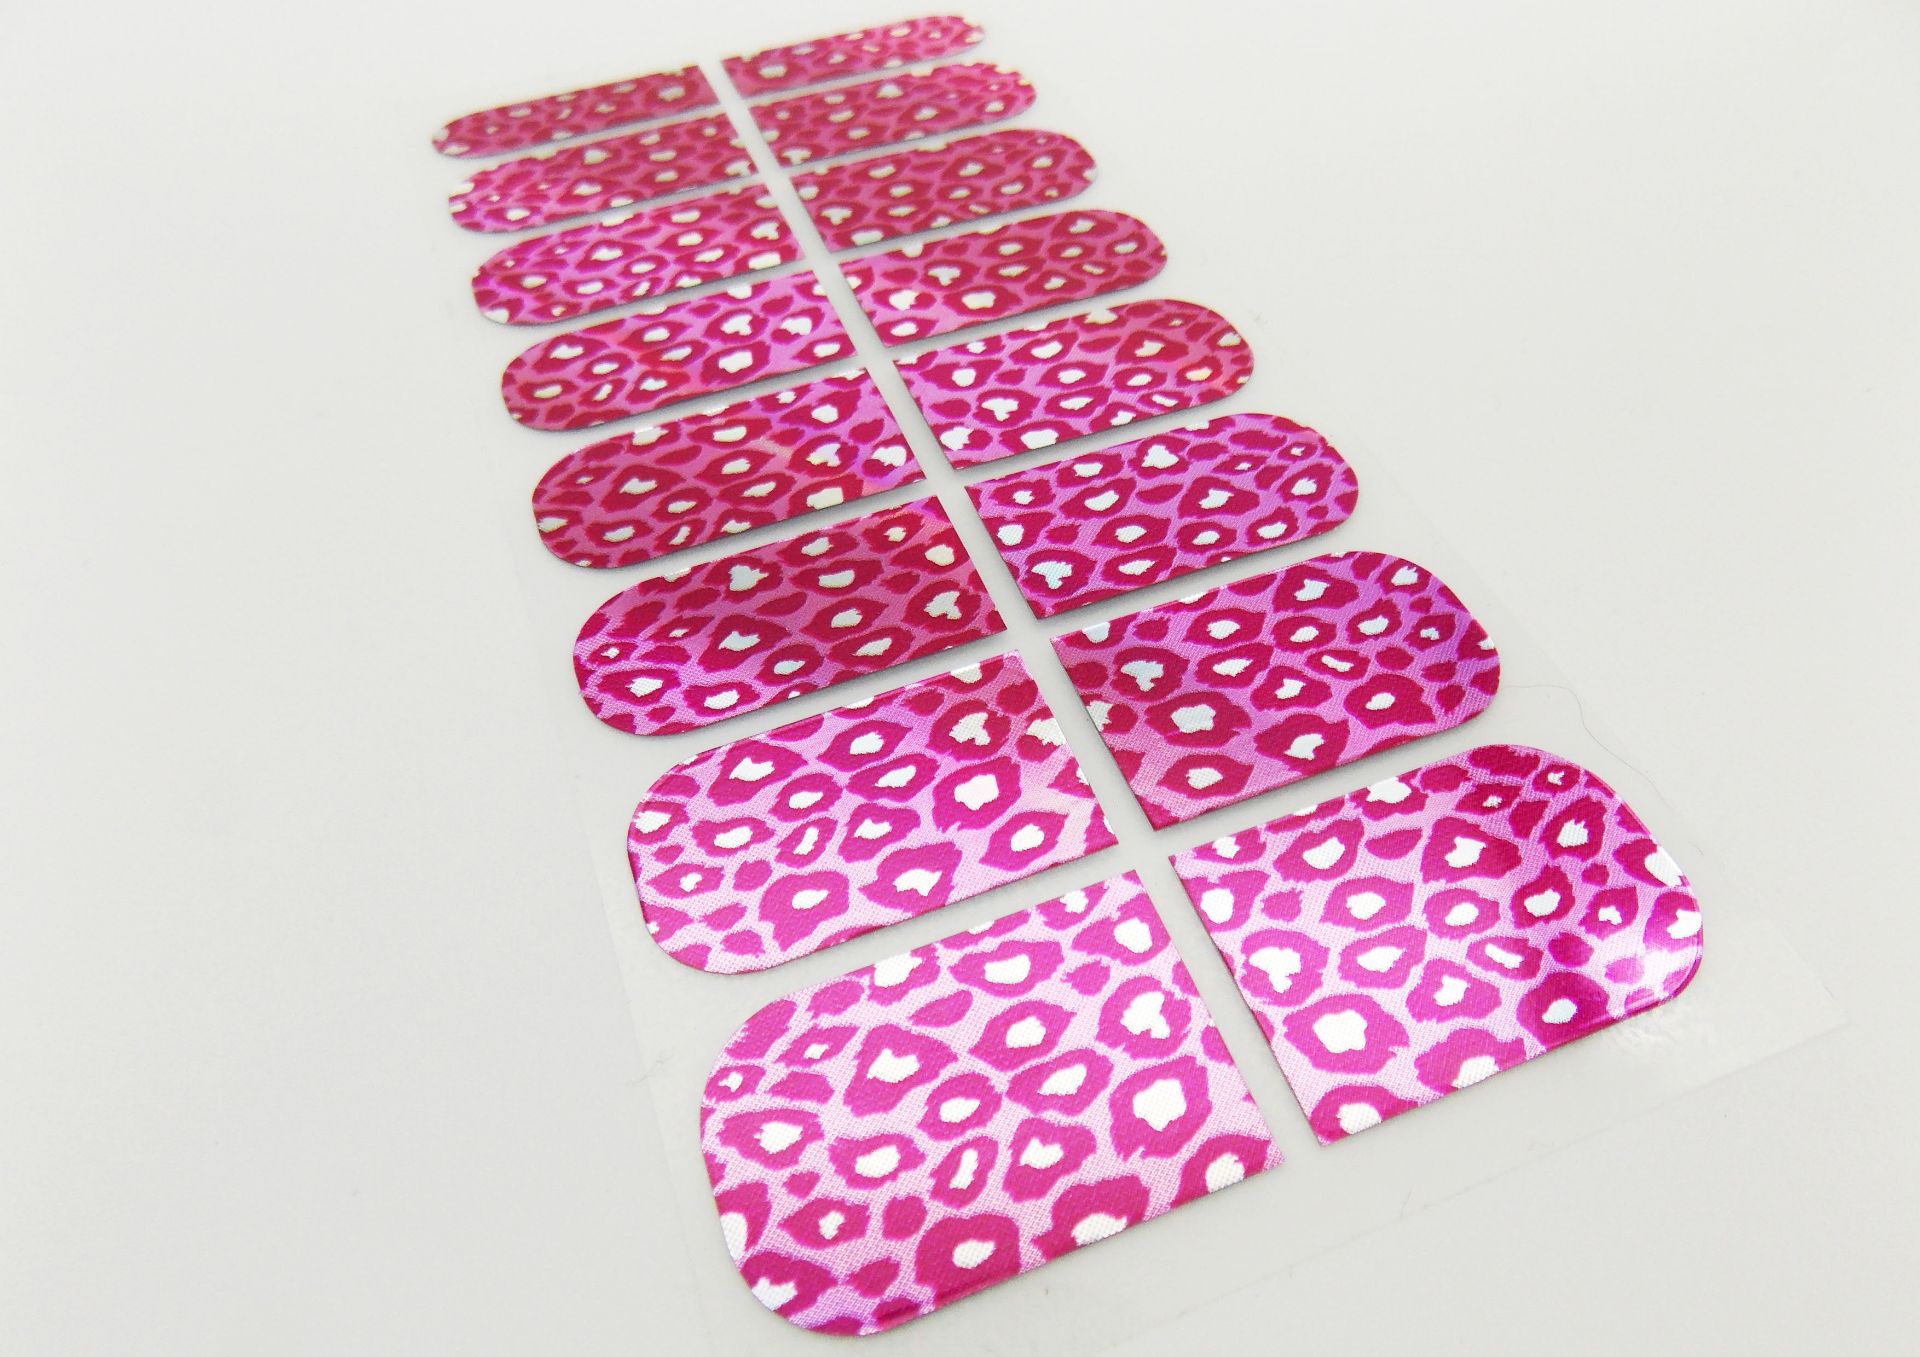 144 Packs Of Professional Nail Art Wrap Transfers - 3 Different Animal Print Styles - Image 4 of 10